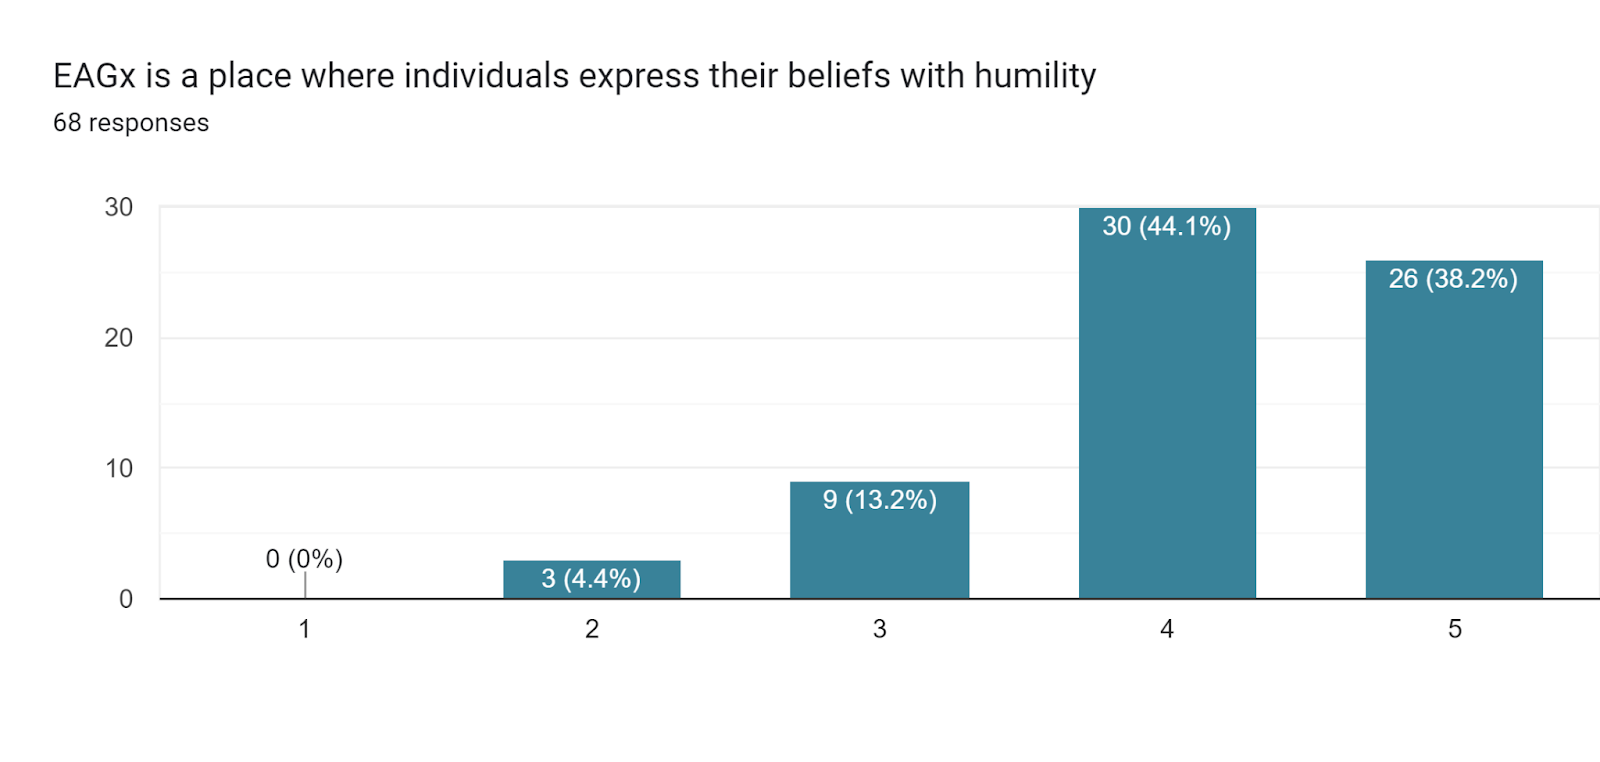 Forms response chart. Question title: EAGx is a place where individuals express their beliefs with humility. Number of responses: 68 responses.